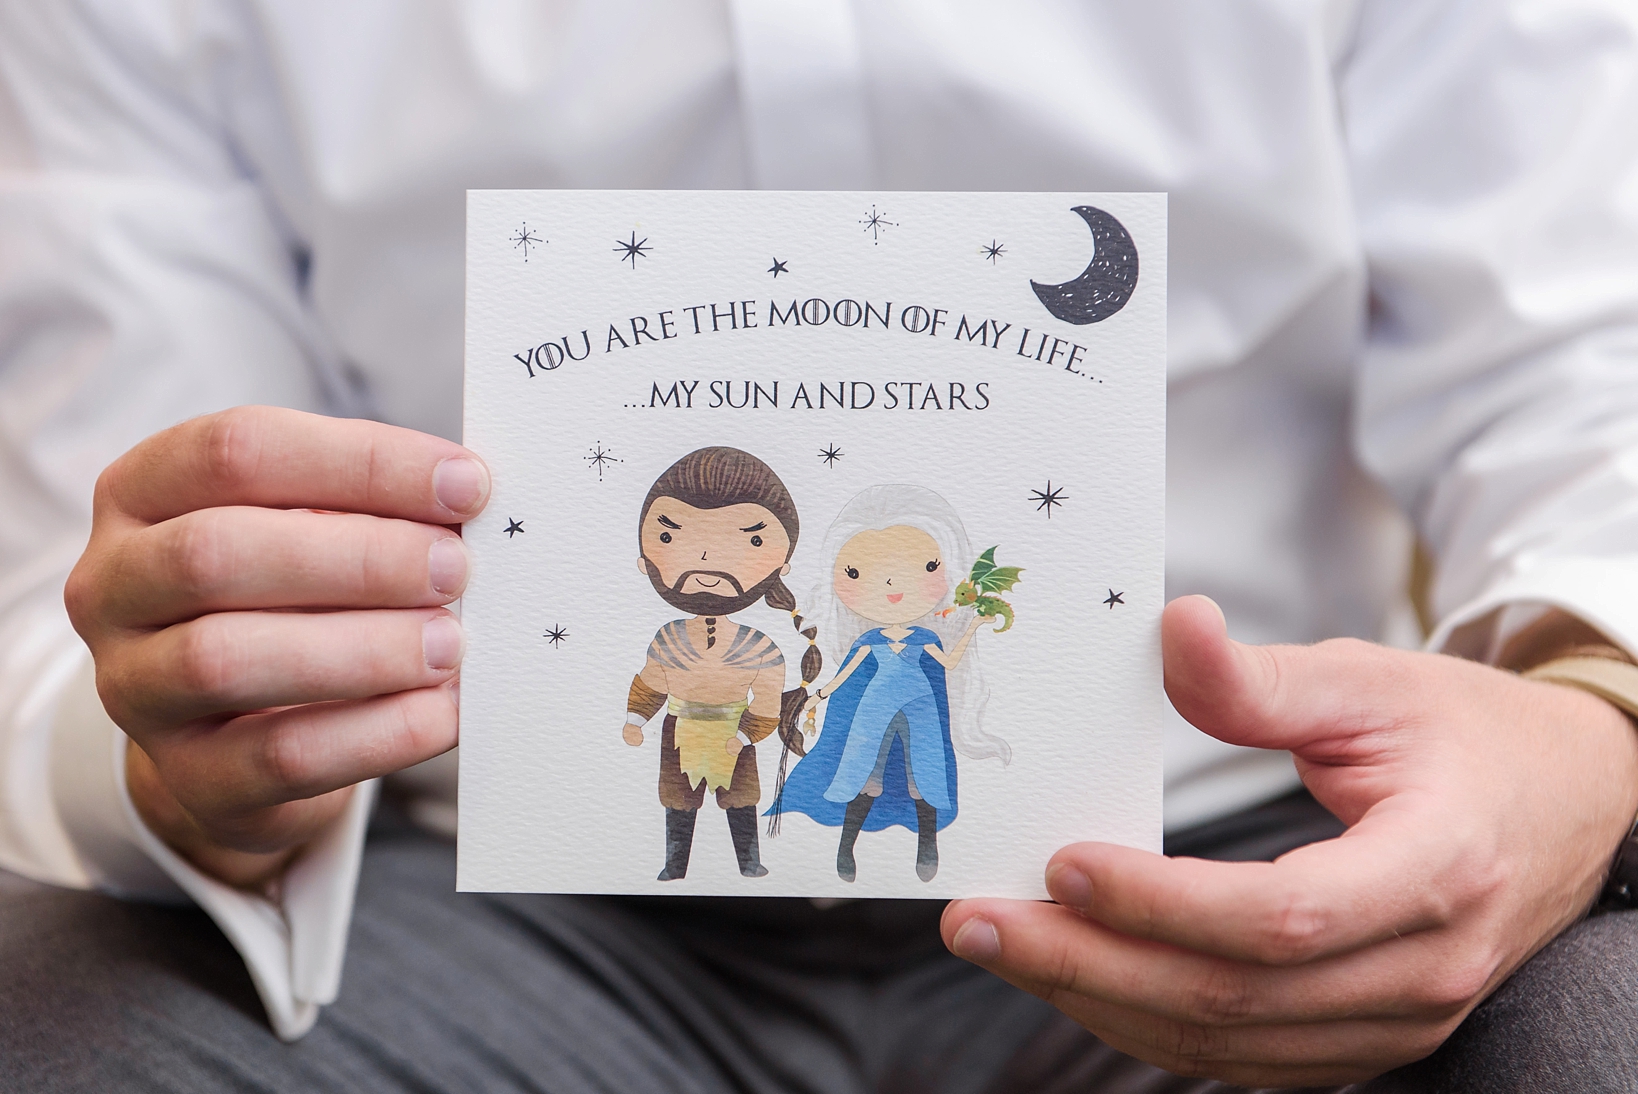 Groom holding up his Game of Thrones inspired wedding card given to him by his Bride